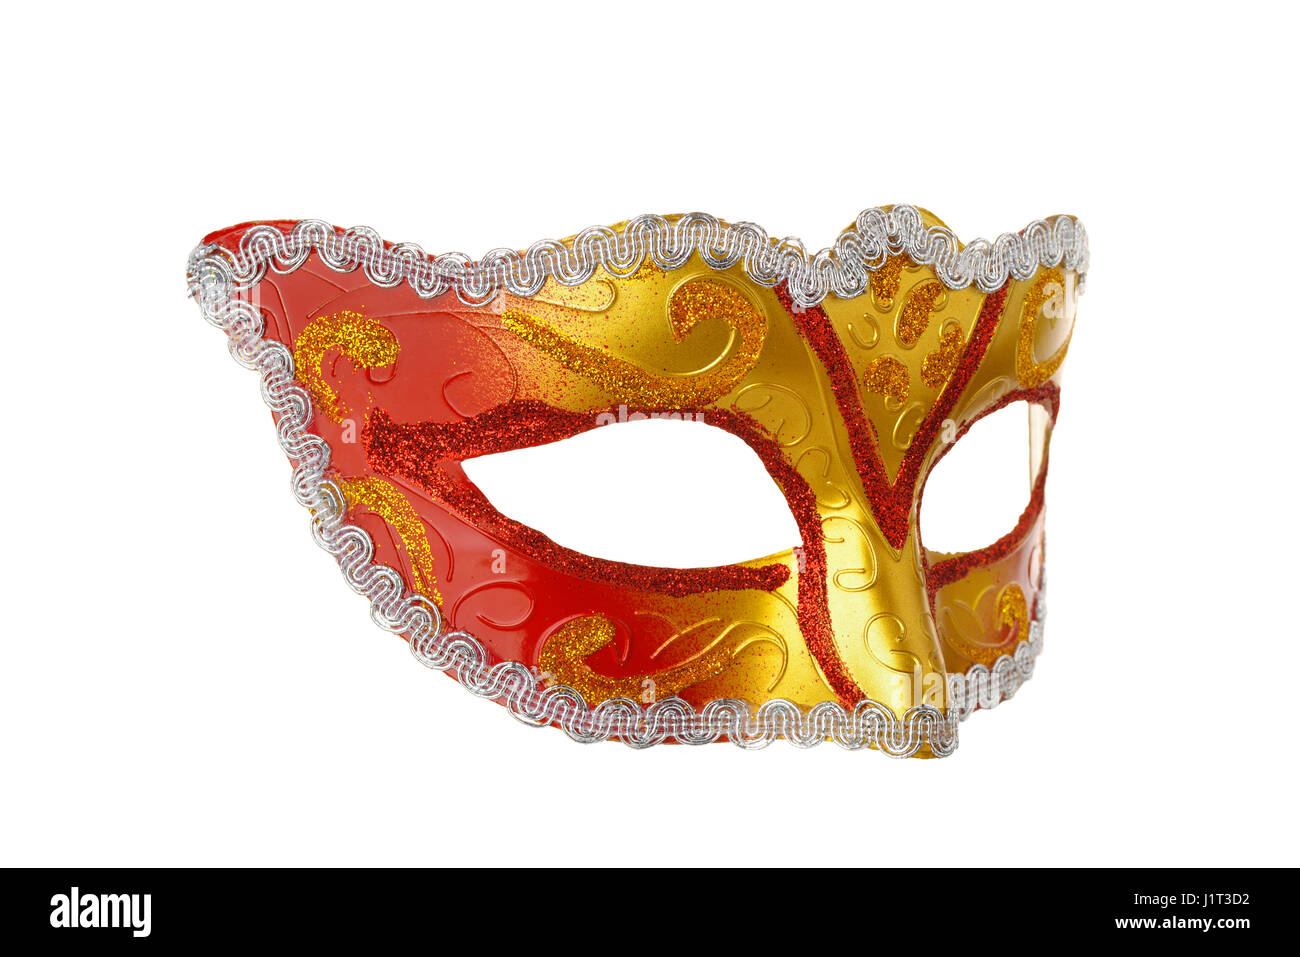 Masque de carnaval isolated on white Banque D'Images